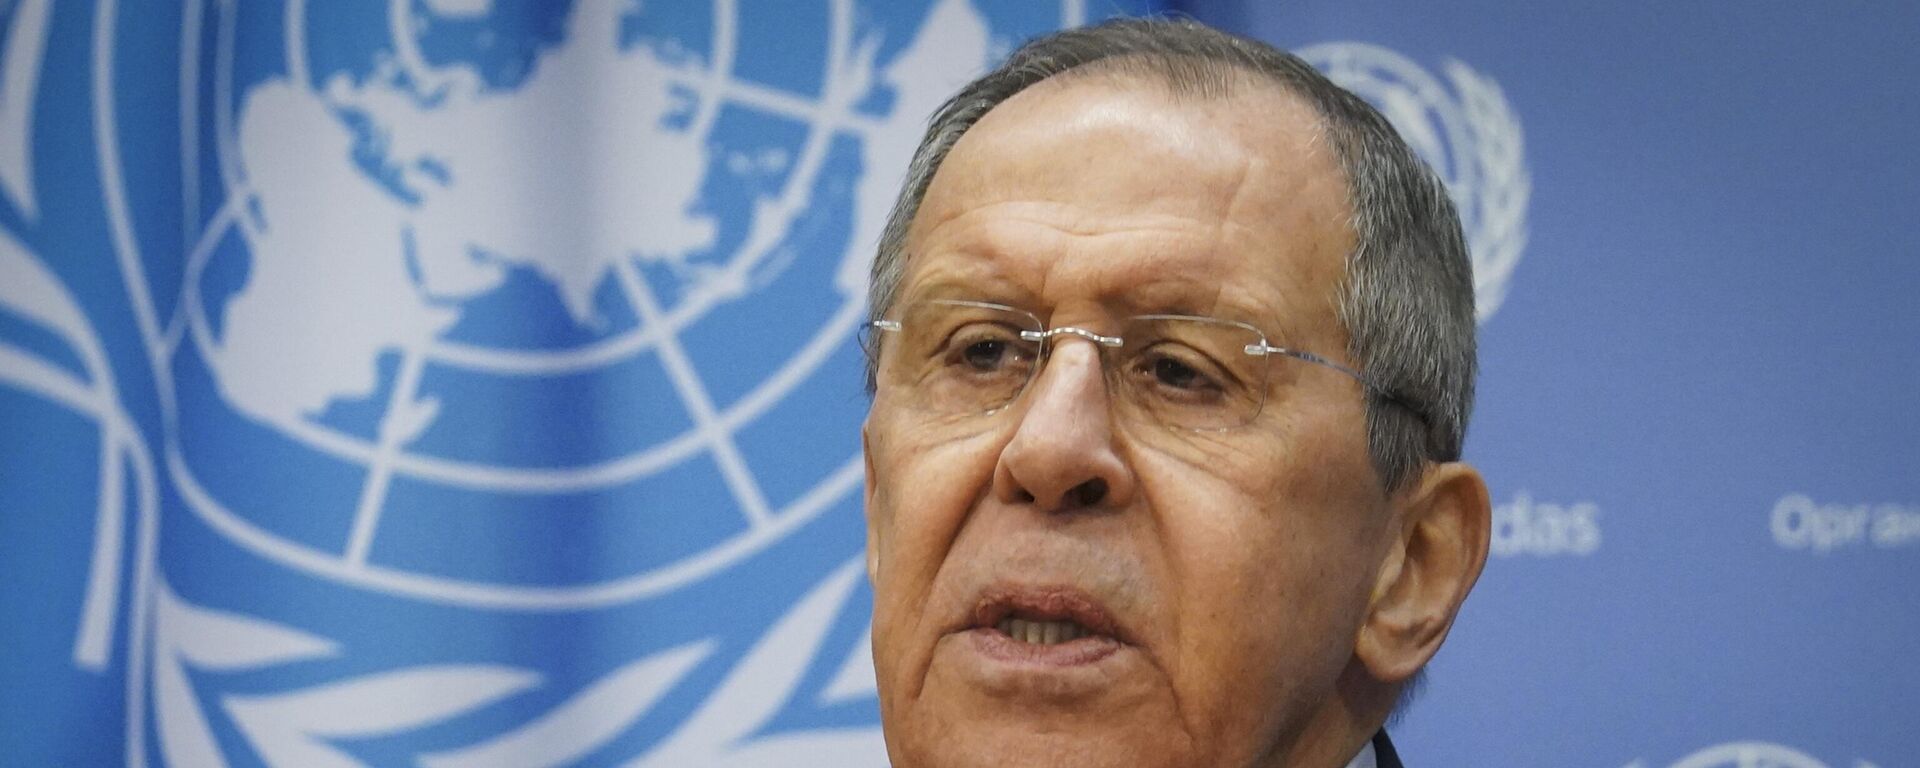 Russia's Foreign Minister Sergey Lavrov speaks during a news conference at the United Nations, Tuesday April 25, 2023. - Sputnik International, 1920, 26.04.2023